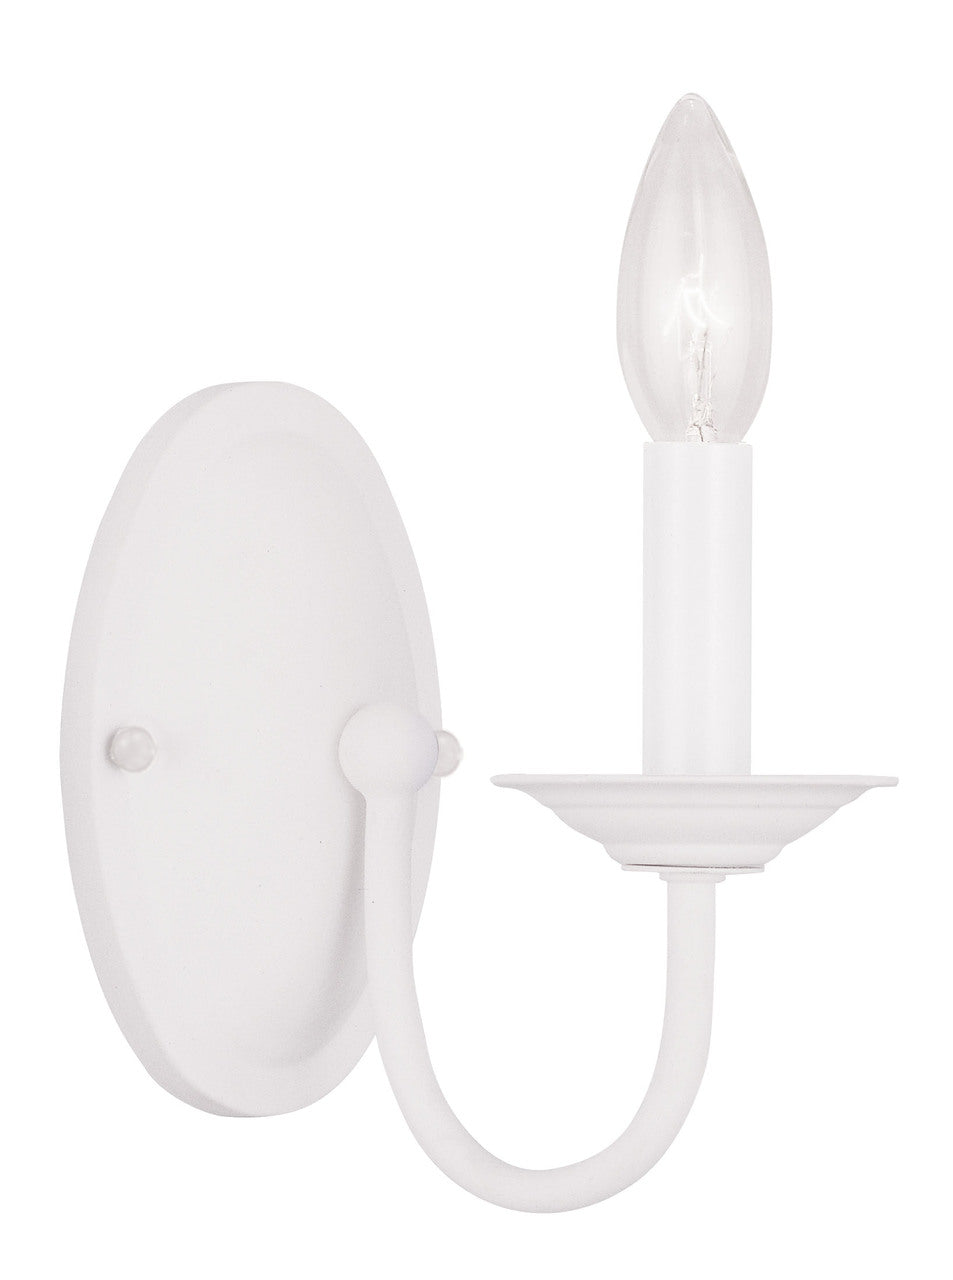 LIVEX Lighting 4151-03 Williamsburgh Wall Sconce in White (1 Light)